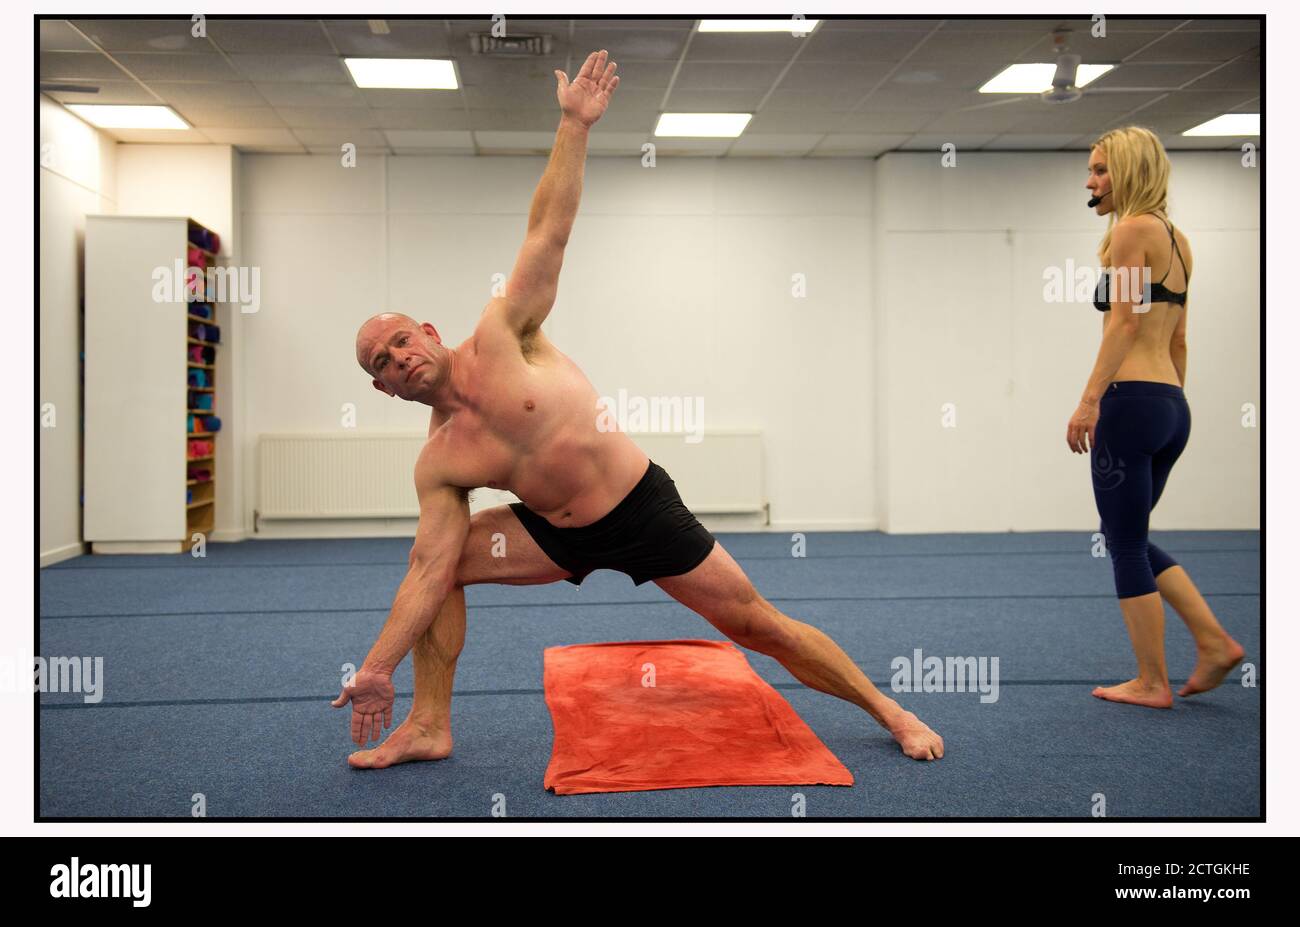 What are the scientifically proven benefits of Bikram yoga? - Quora